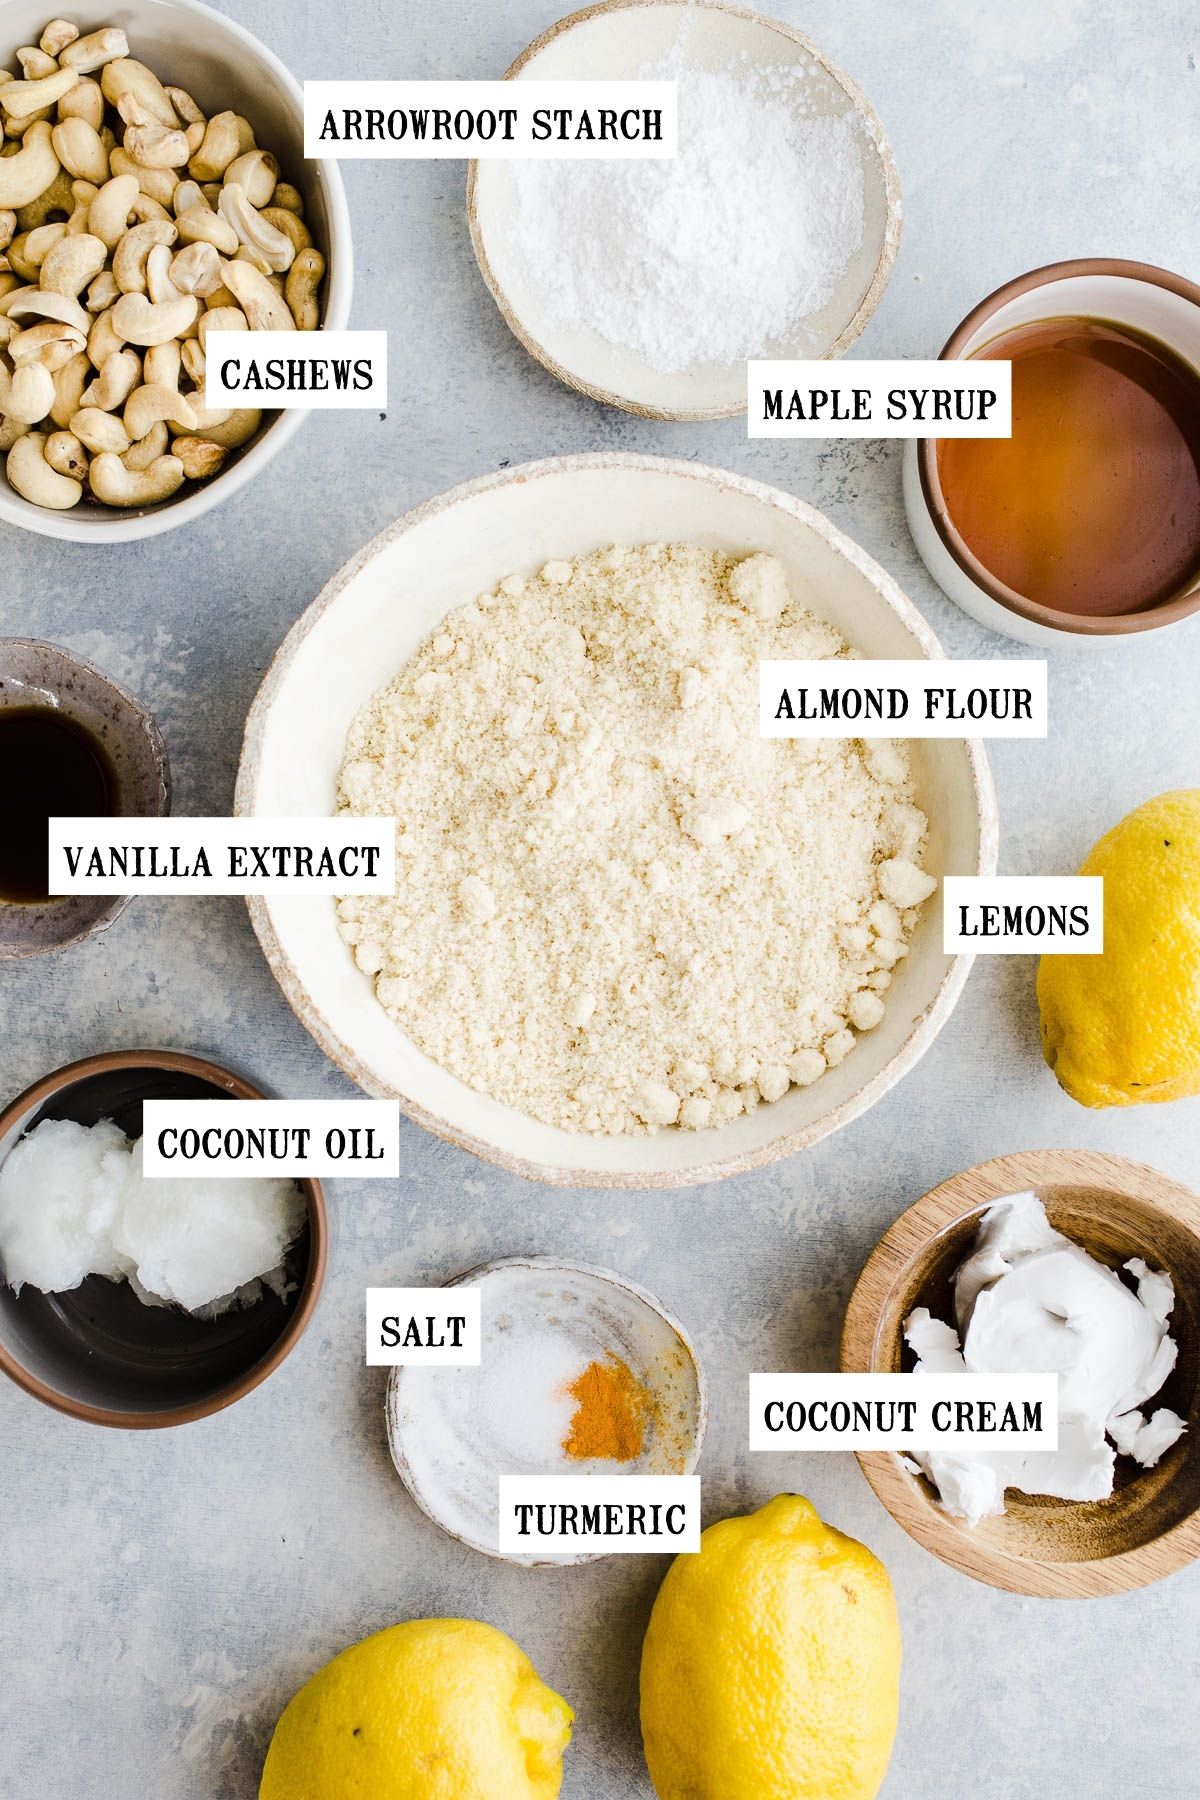 Ingredients for lemon bars in small bowls.